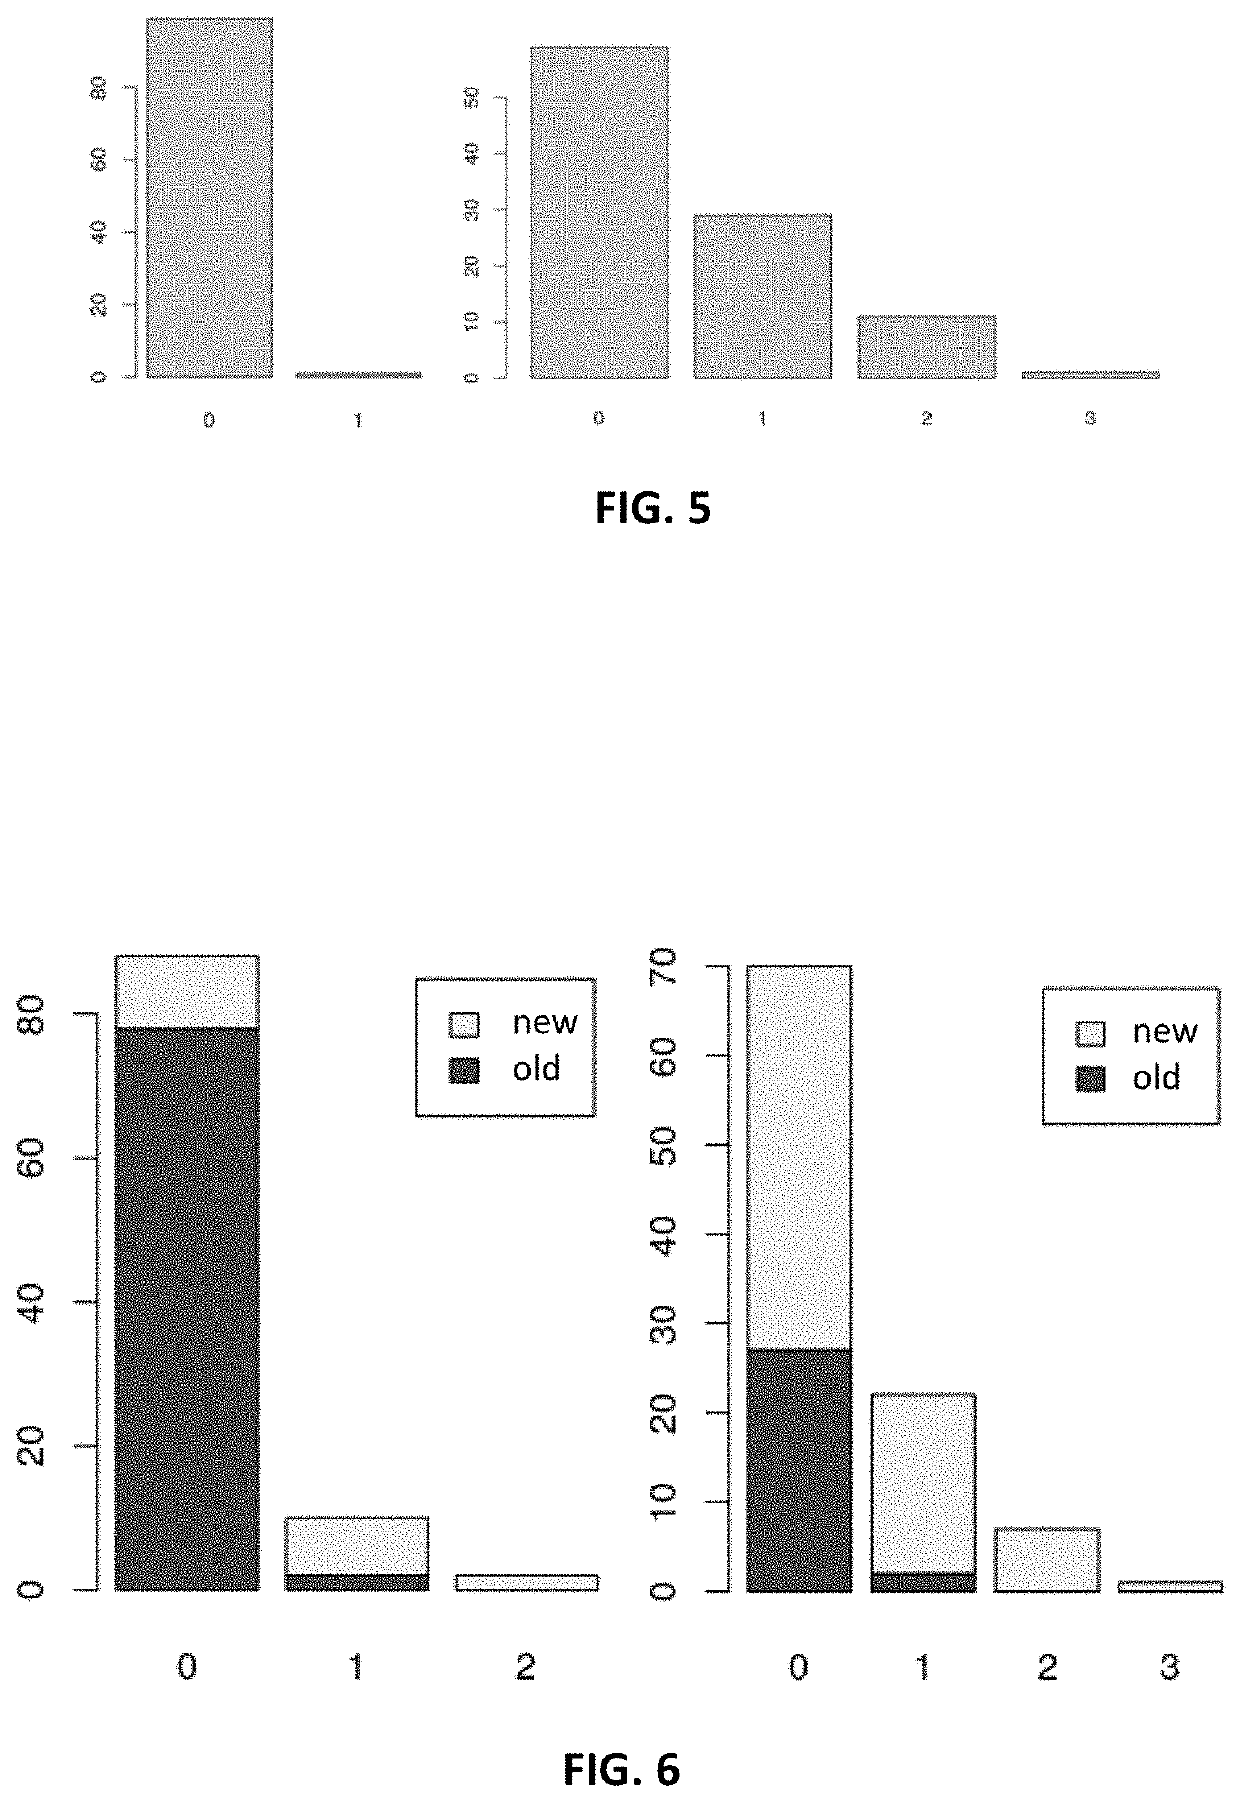 Method for determining a quantification of old and new RNA